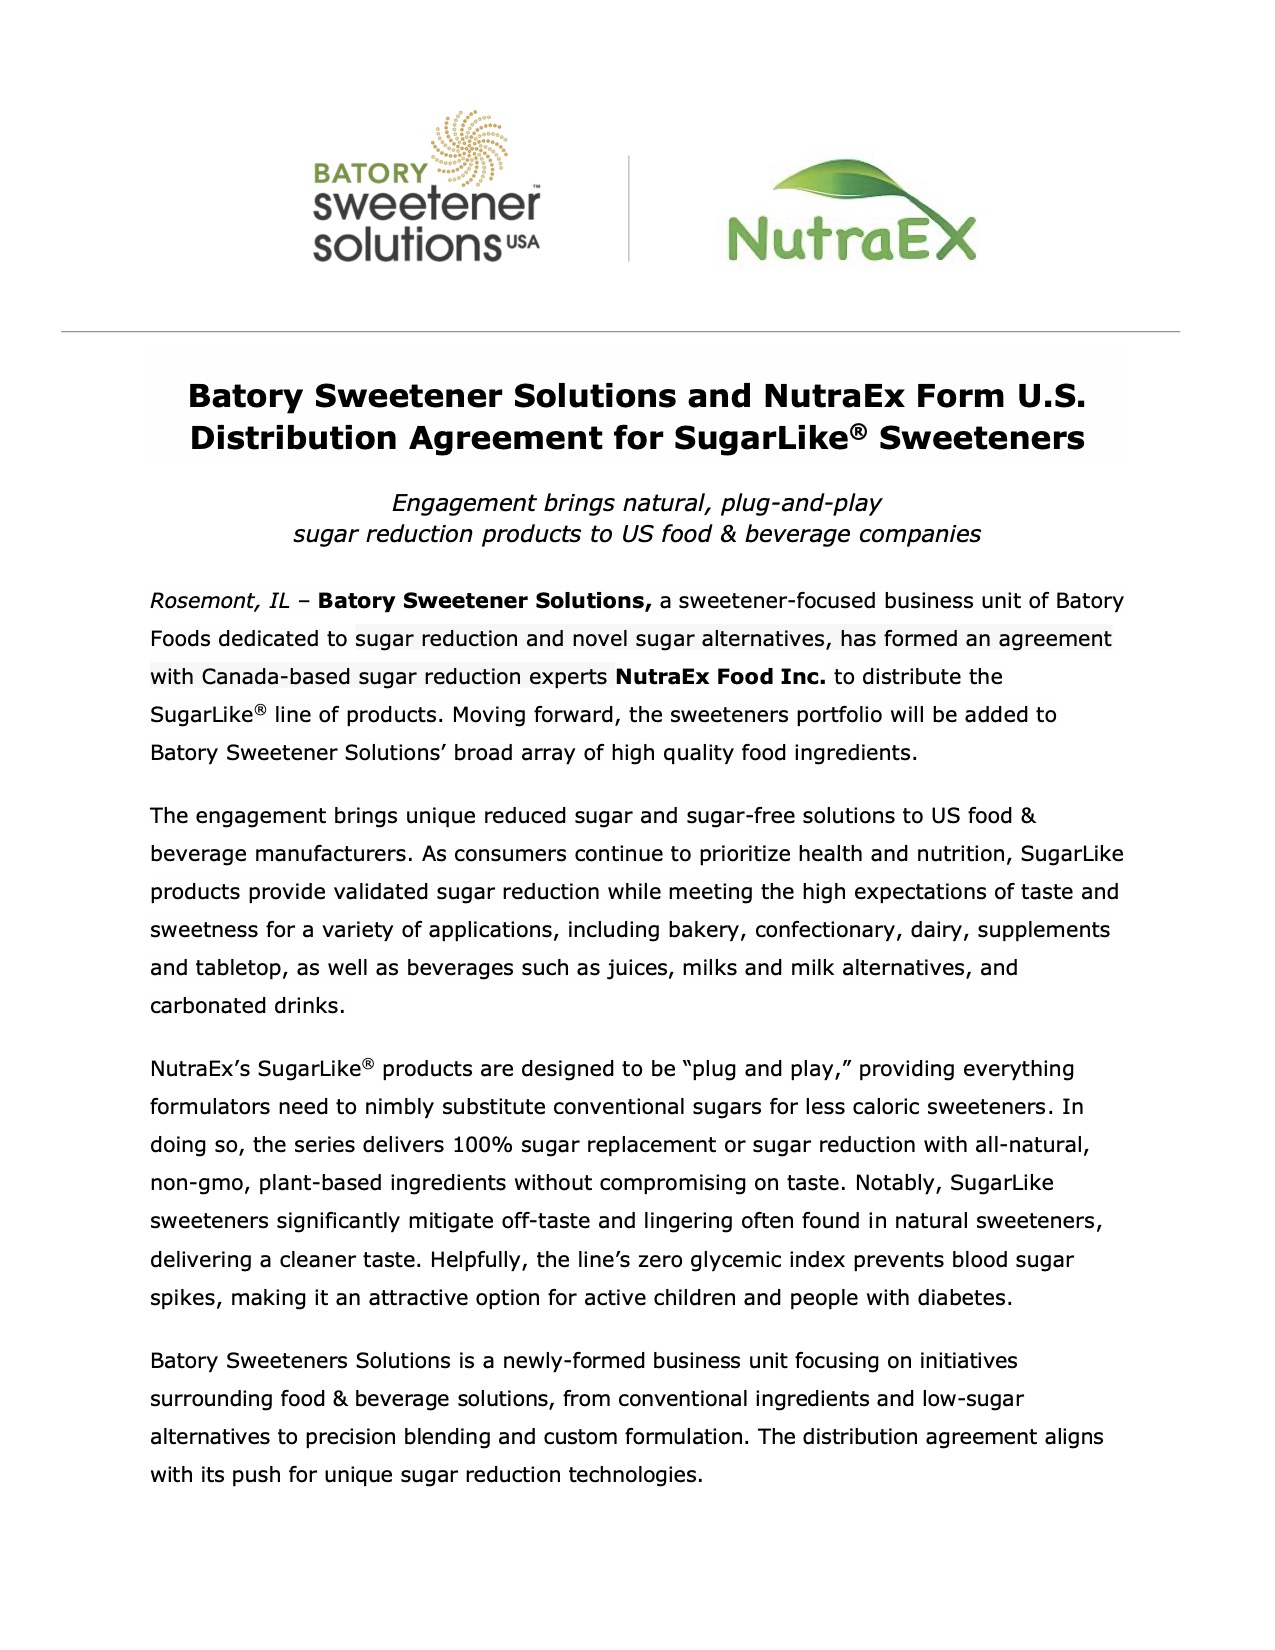 Batory Sweetener Solutions Distribution Agreement with NutraEx Cover